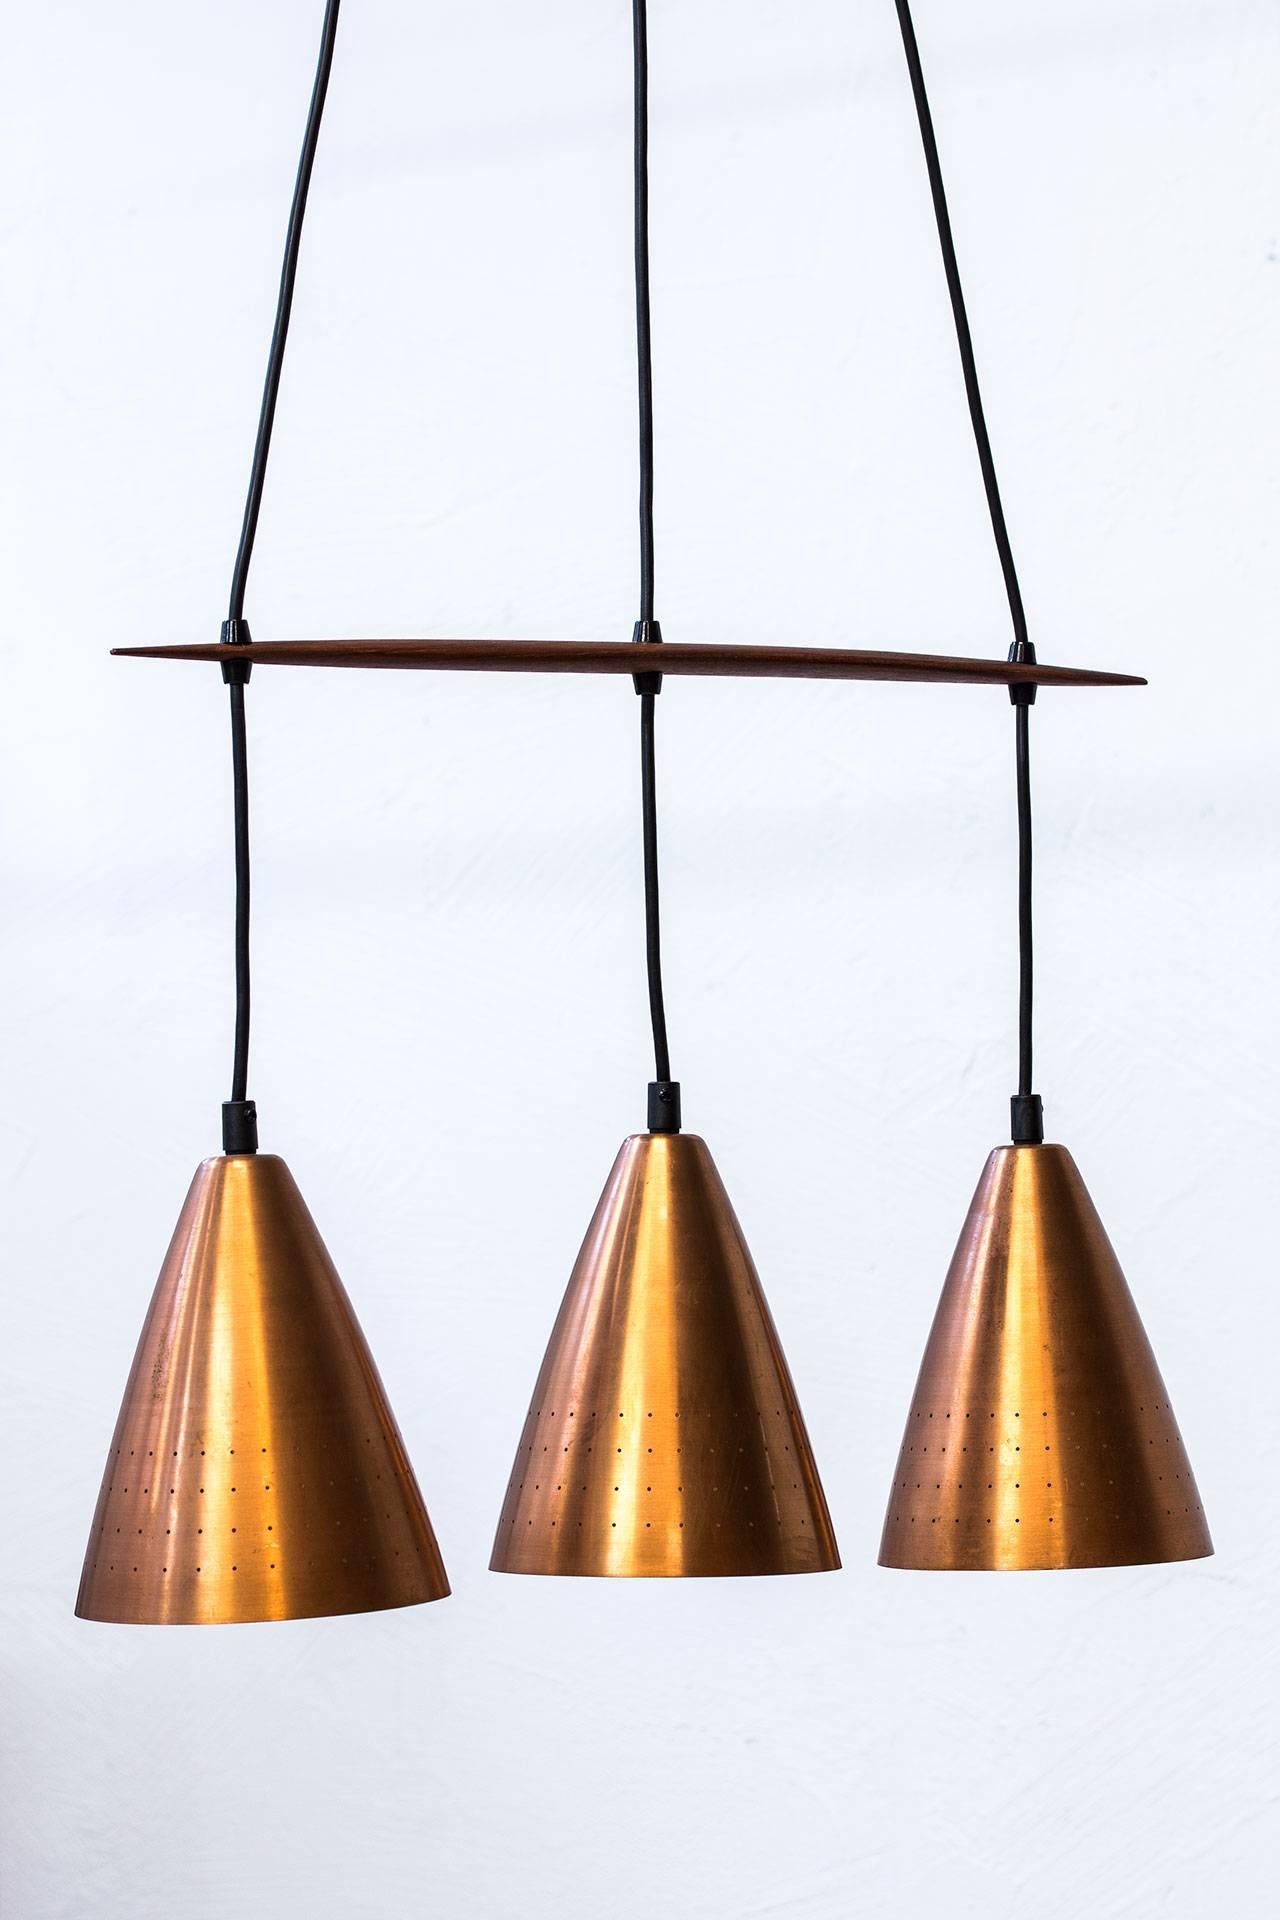 Ceiling lamp in copper and teak designed by Hans-Agne Jakobsson, in Åhus, Sweden. Model from the early 1950s with three perforated copper shades. Copper ceiling cup.
Stretcher in teak. Adjustable height and length for the shades. New electricity.